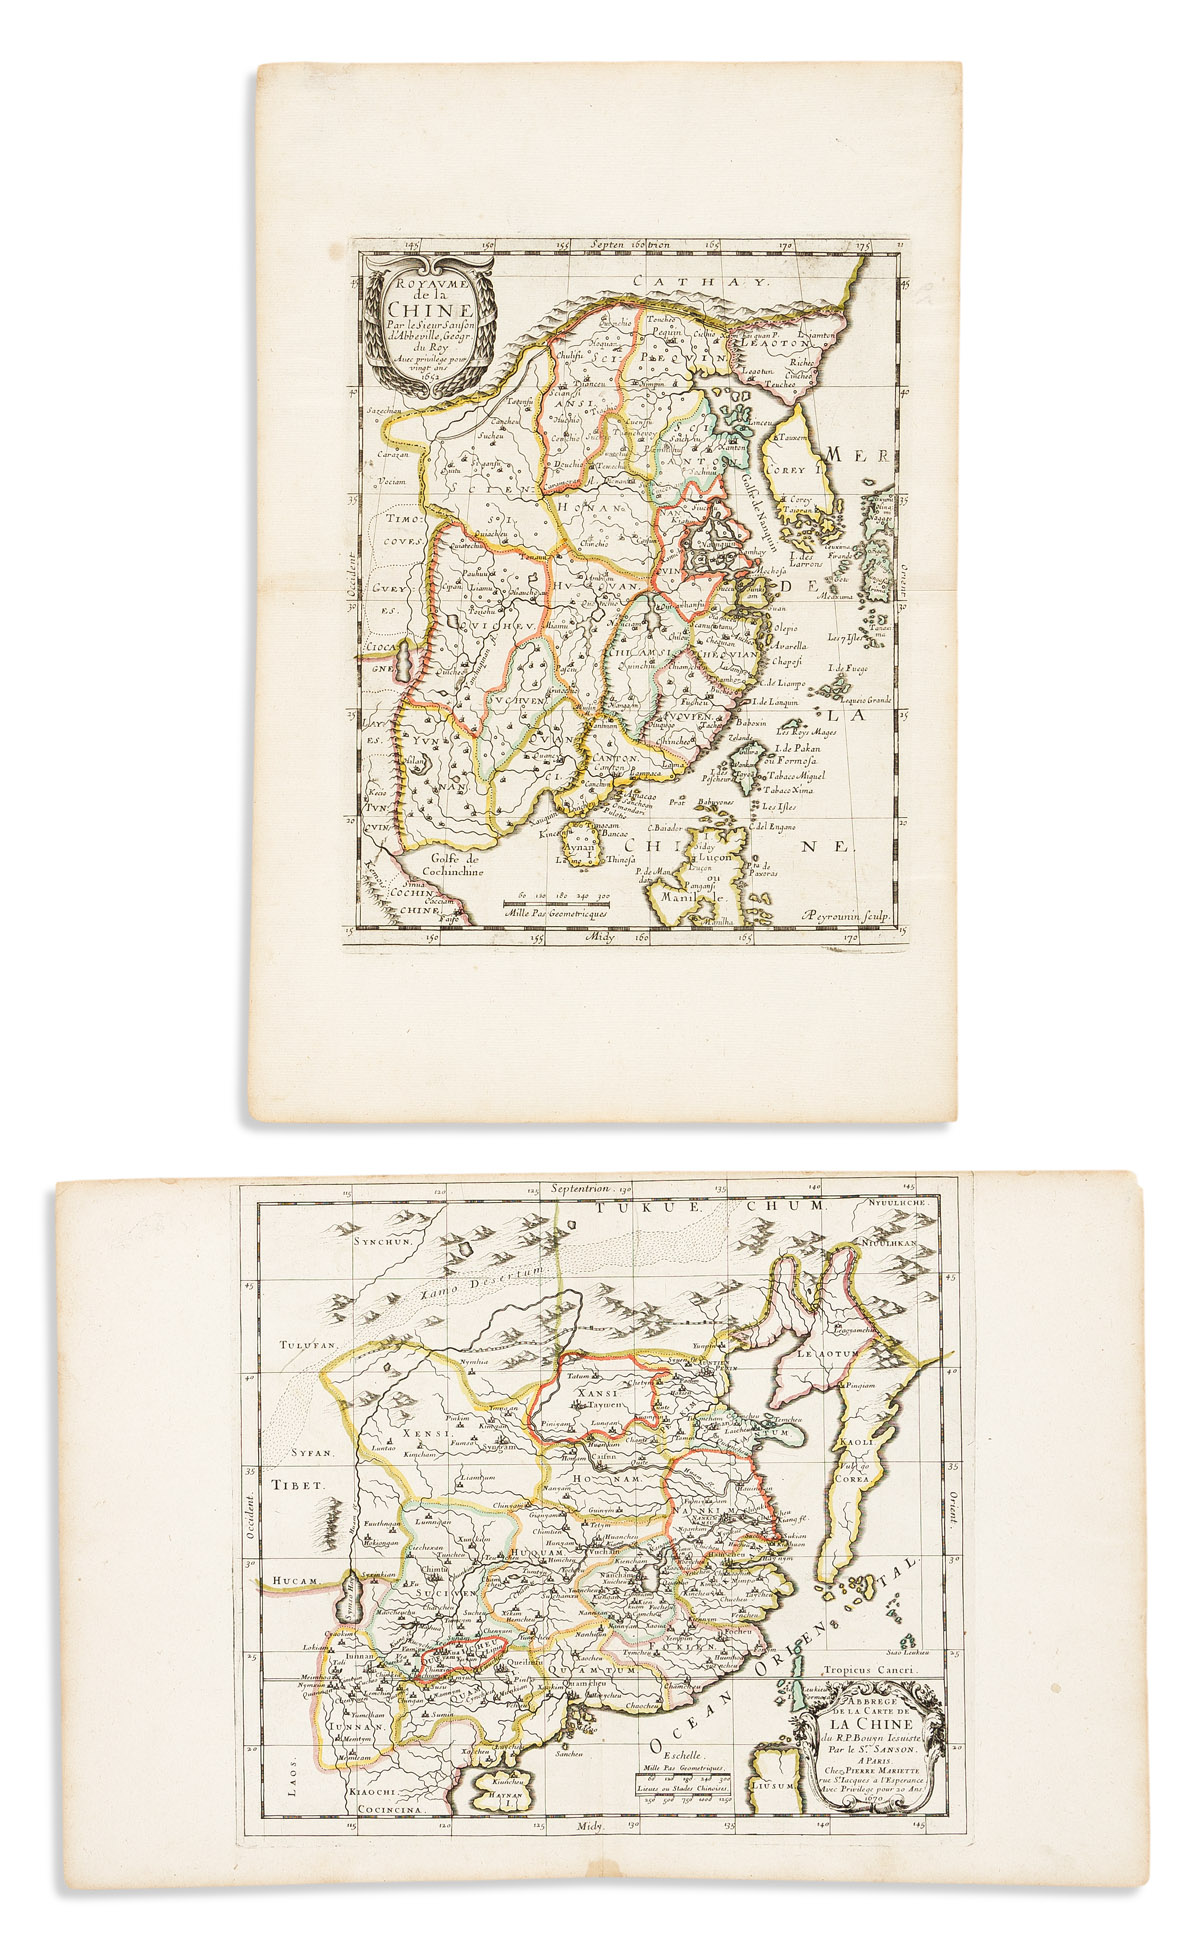 (CHINA.) Two small format seventeenth-century double-page engraved maps of China and Korea.